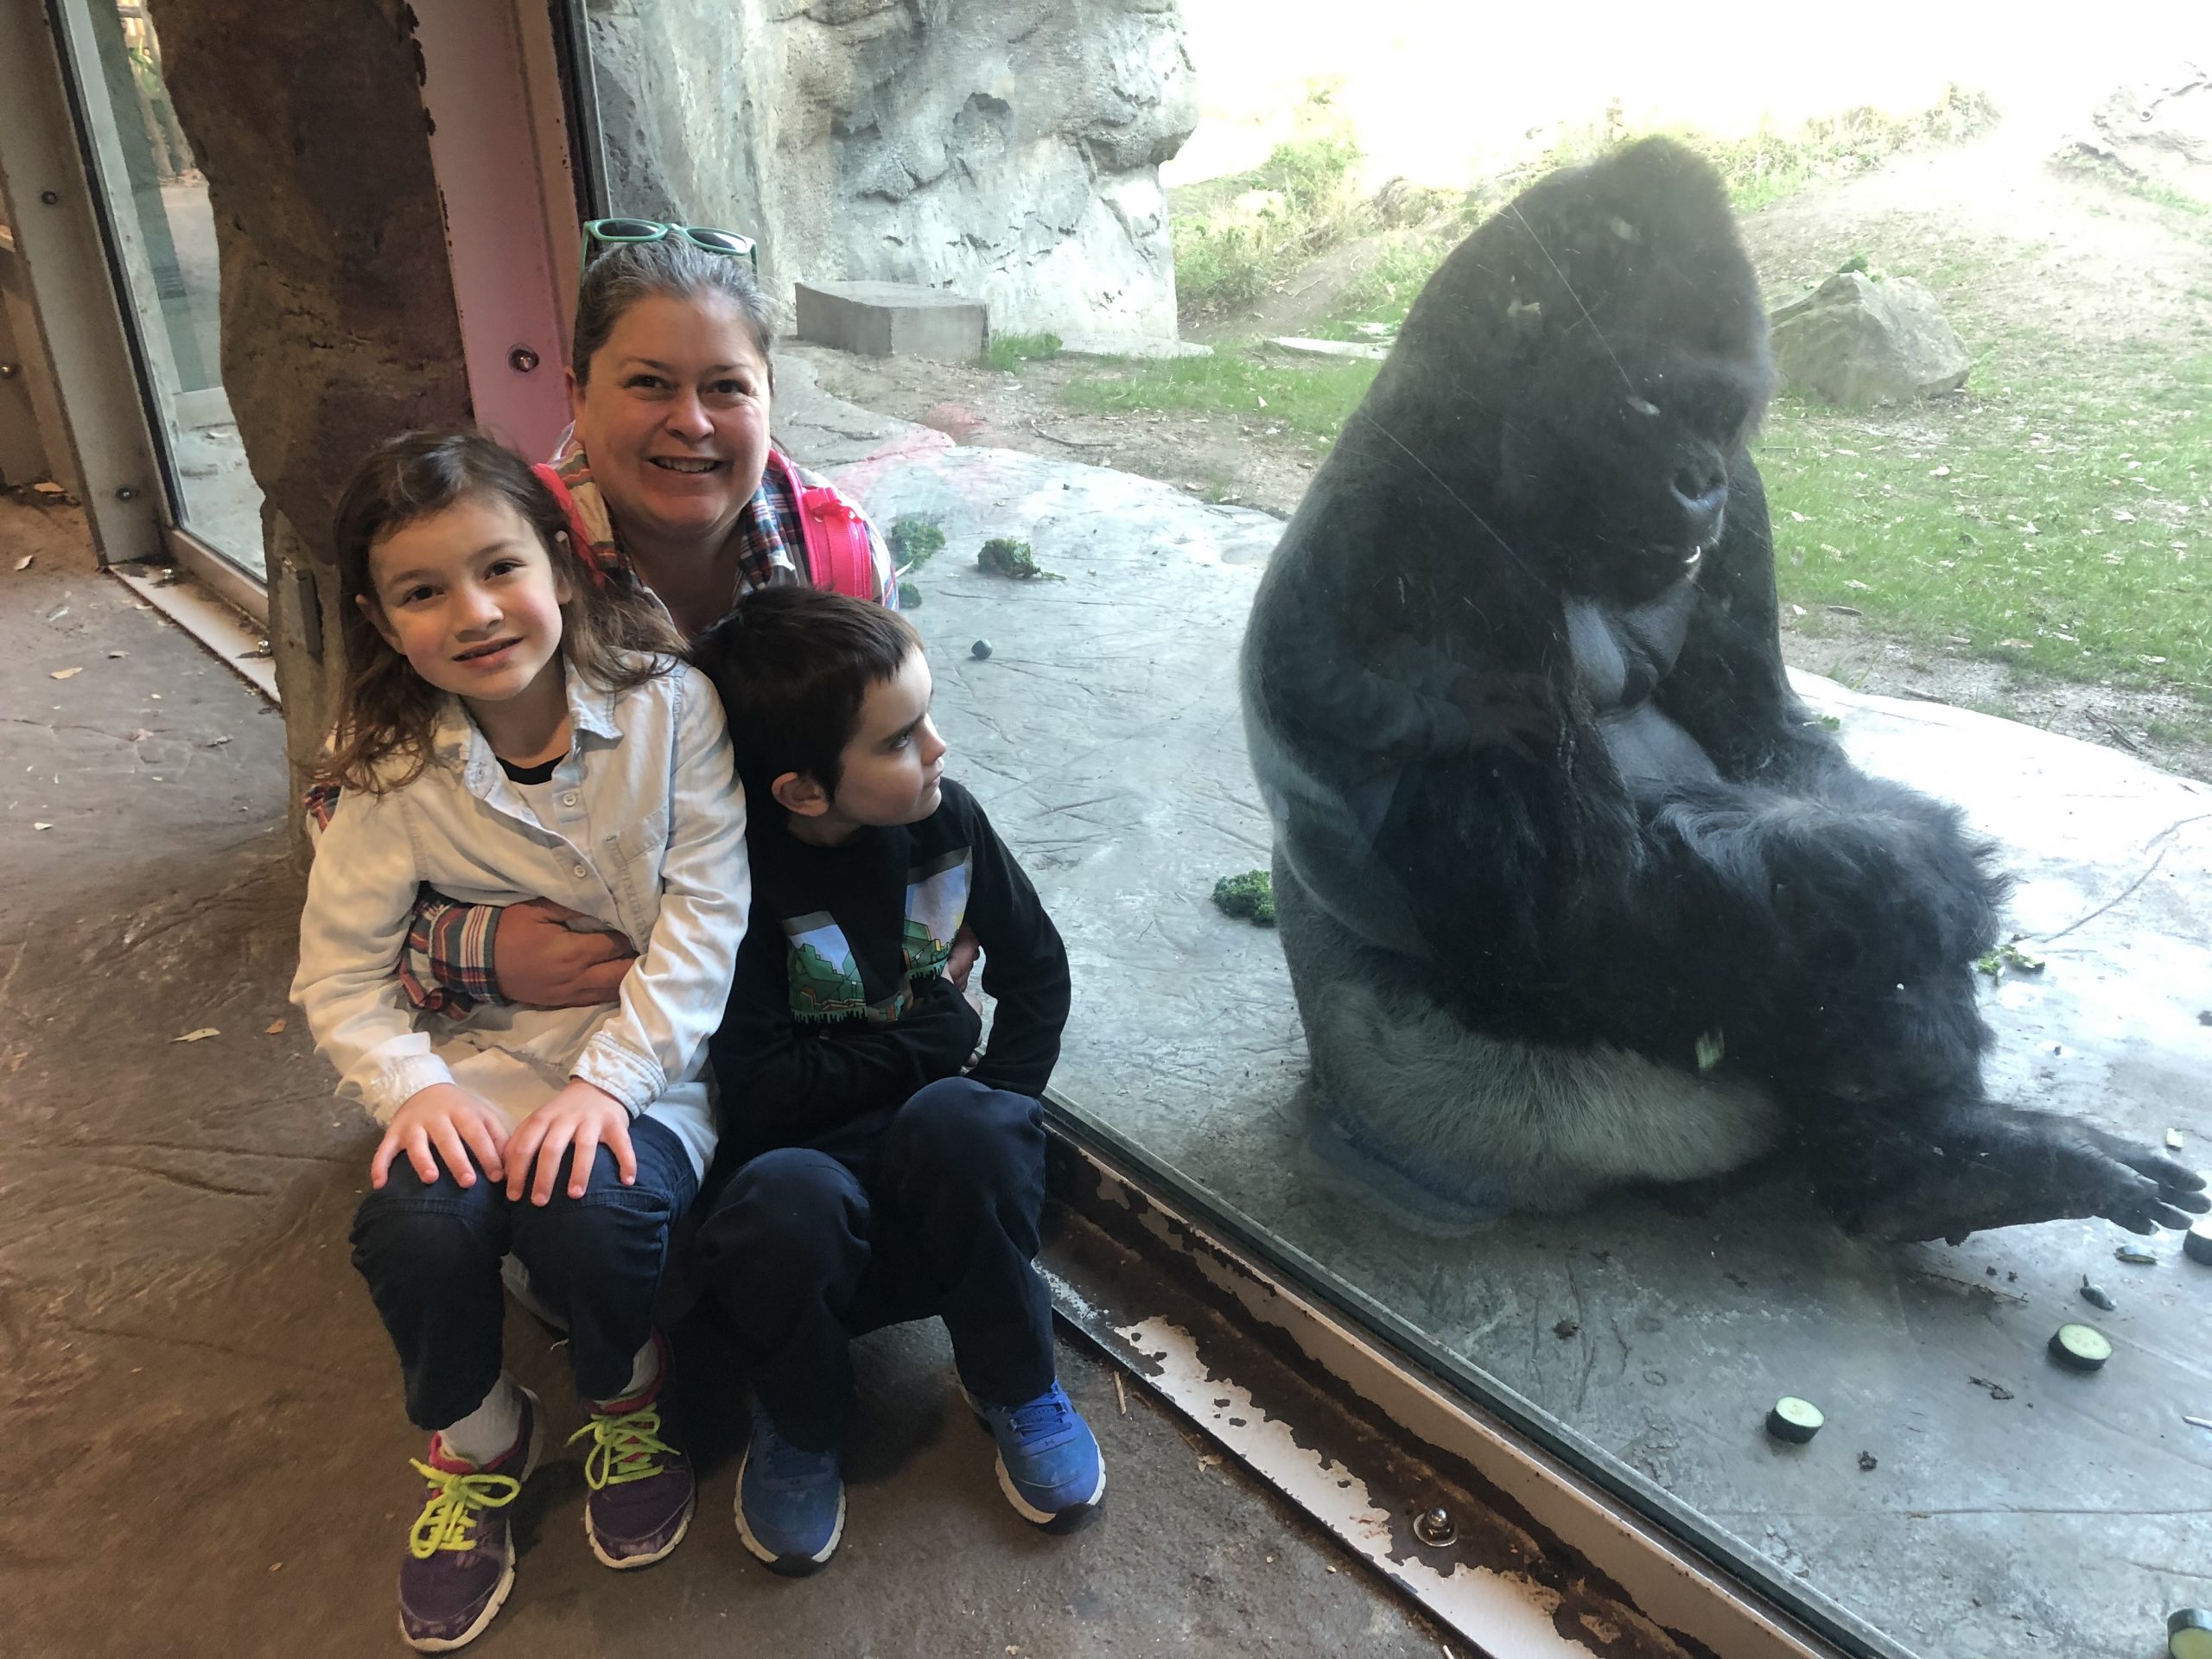 A mother and two children pose beside a window. A gorilla sits on the other side of the glass.